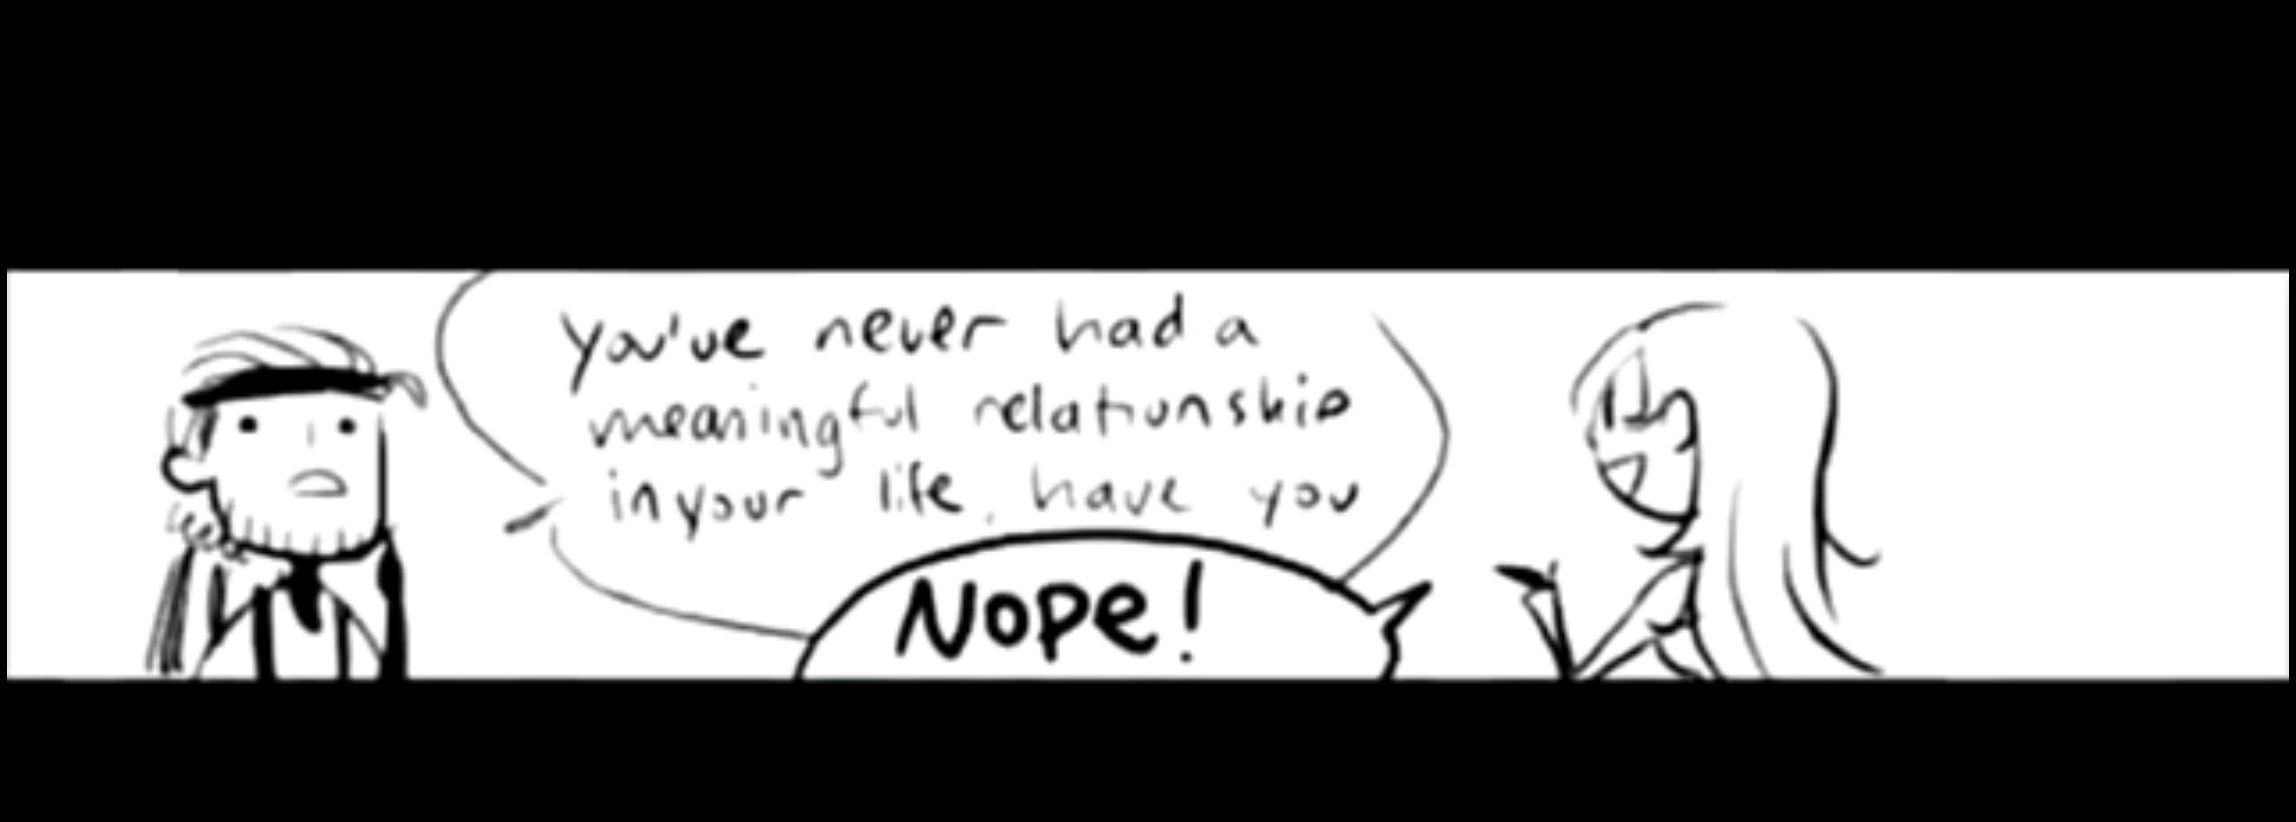 never had a meaningful relationship Blank Meme Template